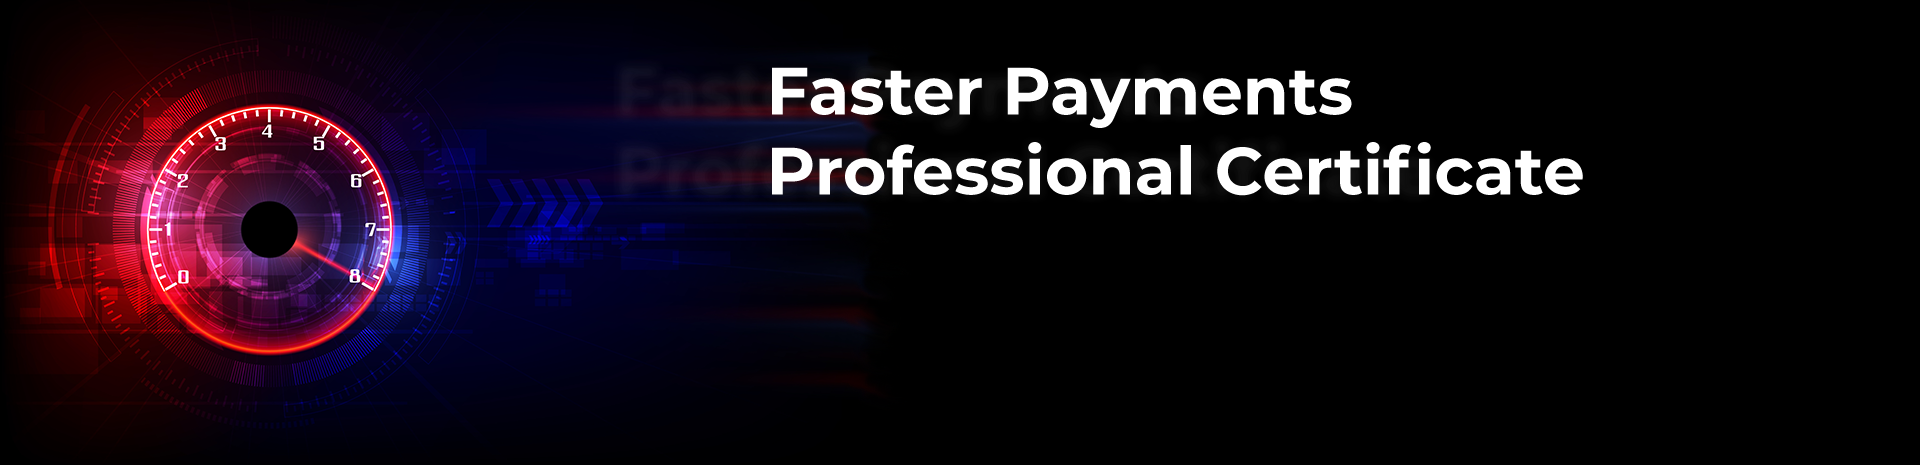 Faster Payments Professional Certificate